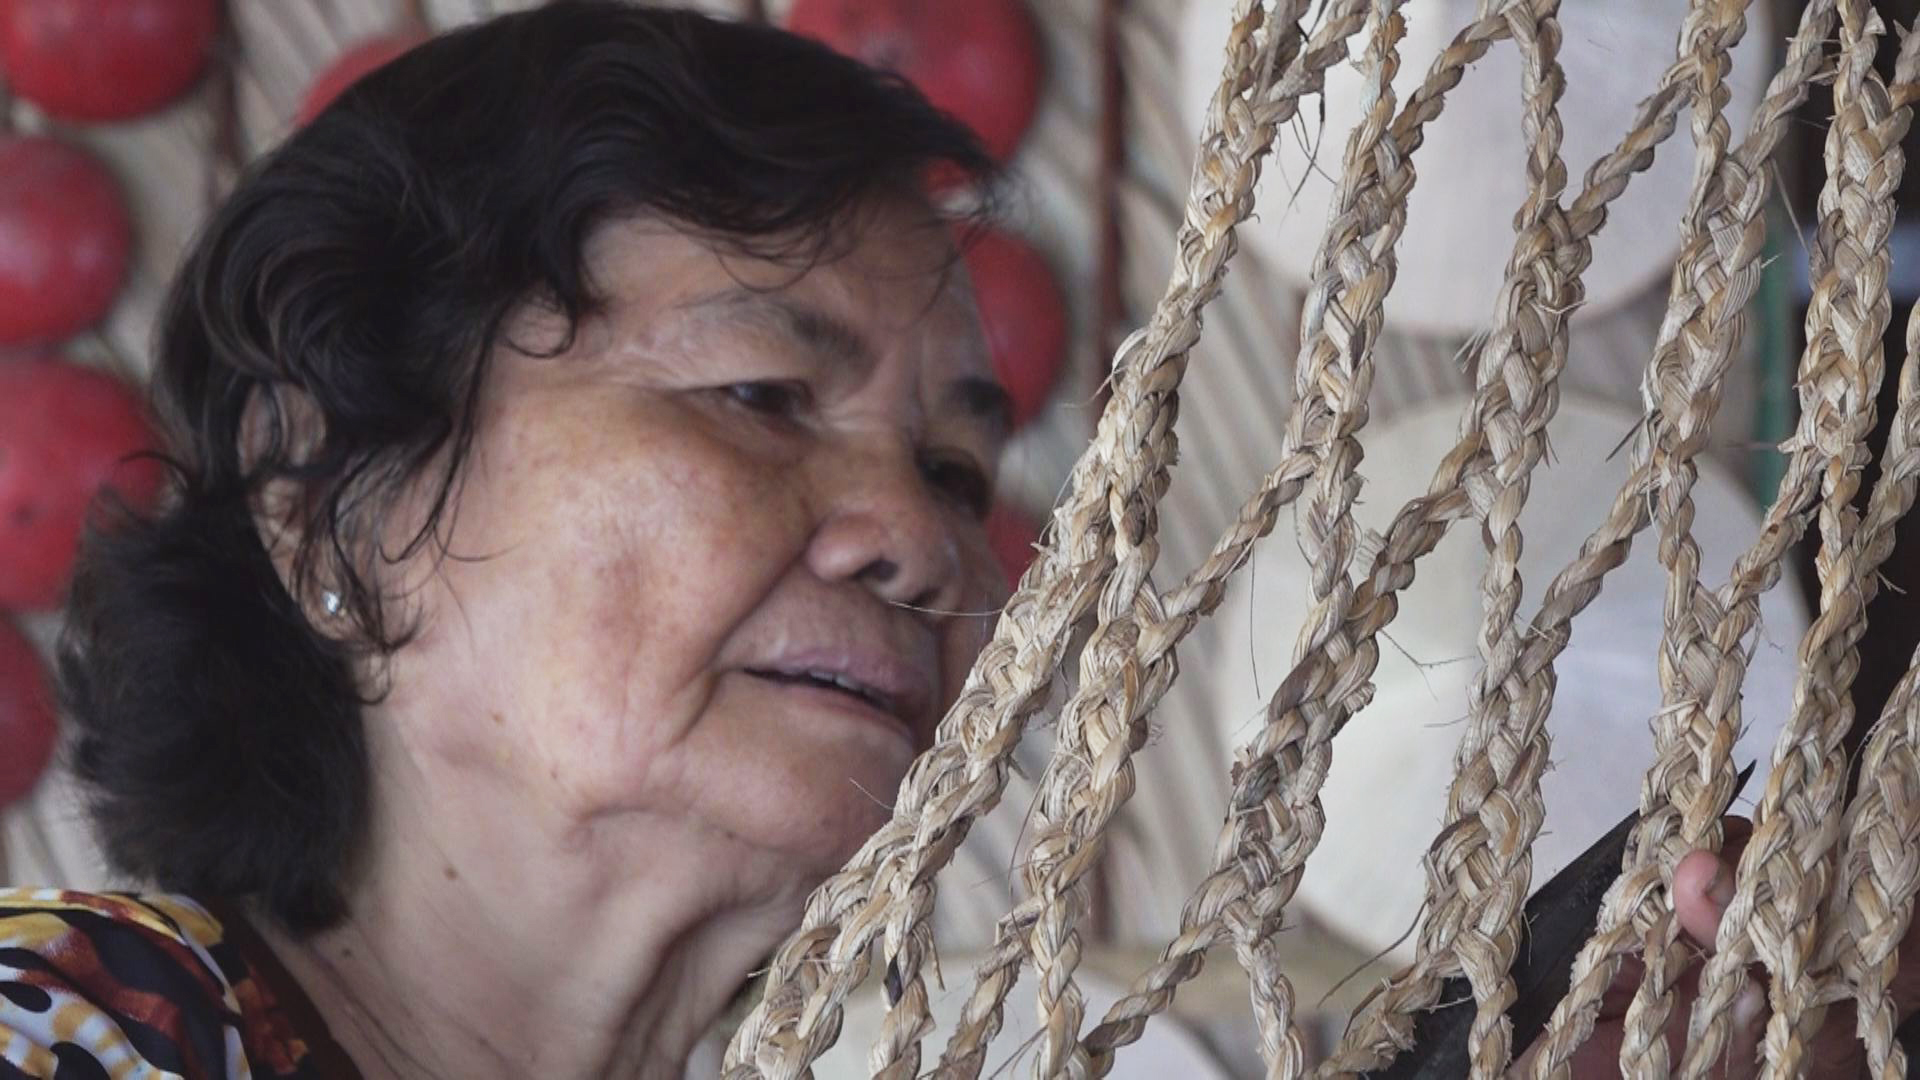 Woman spends 50 years fashioning hammocks from dried banana leaves in Vietnam